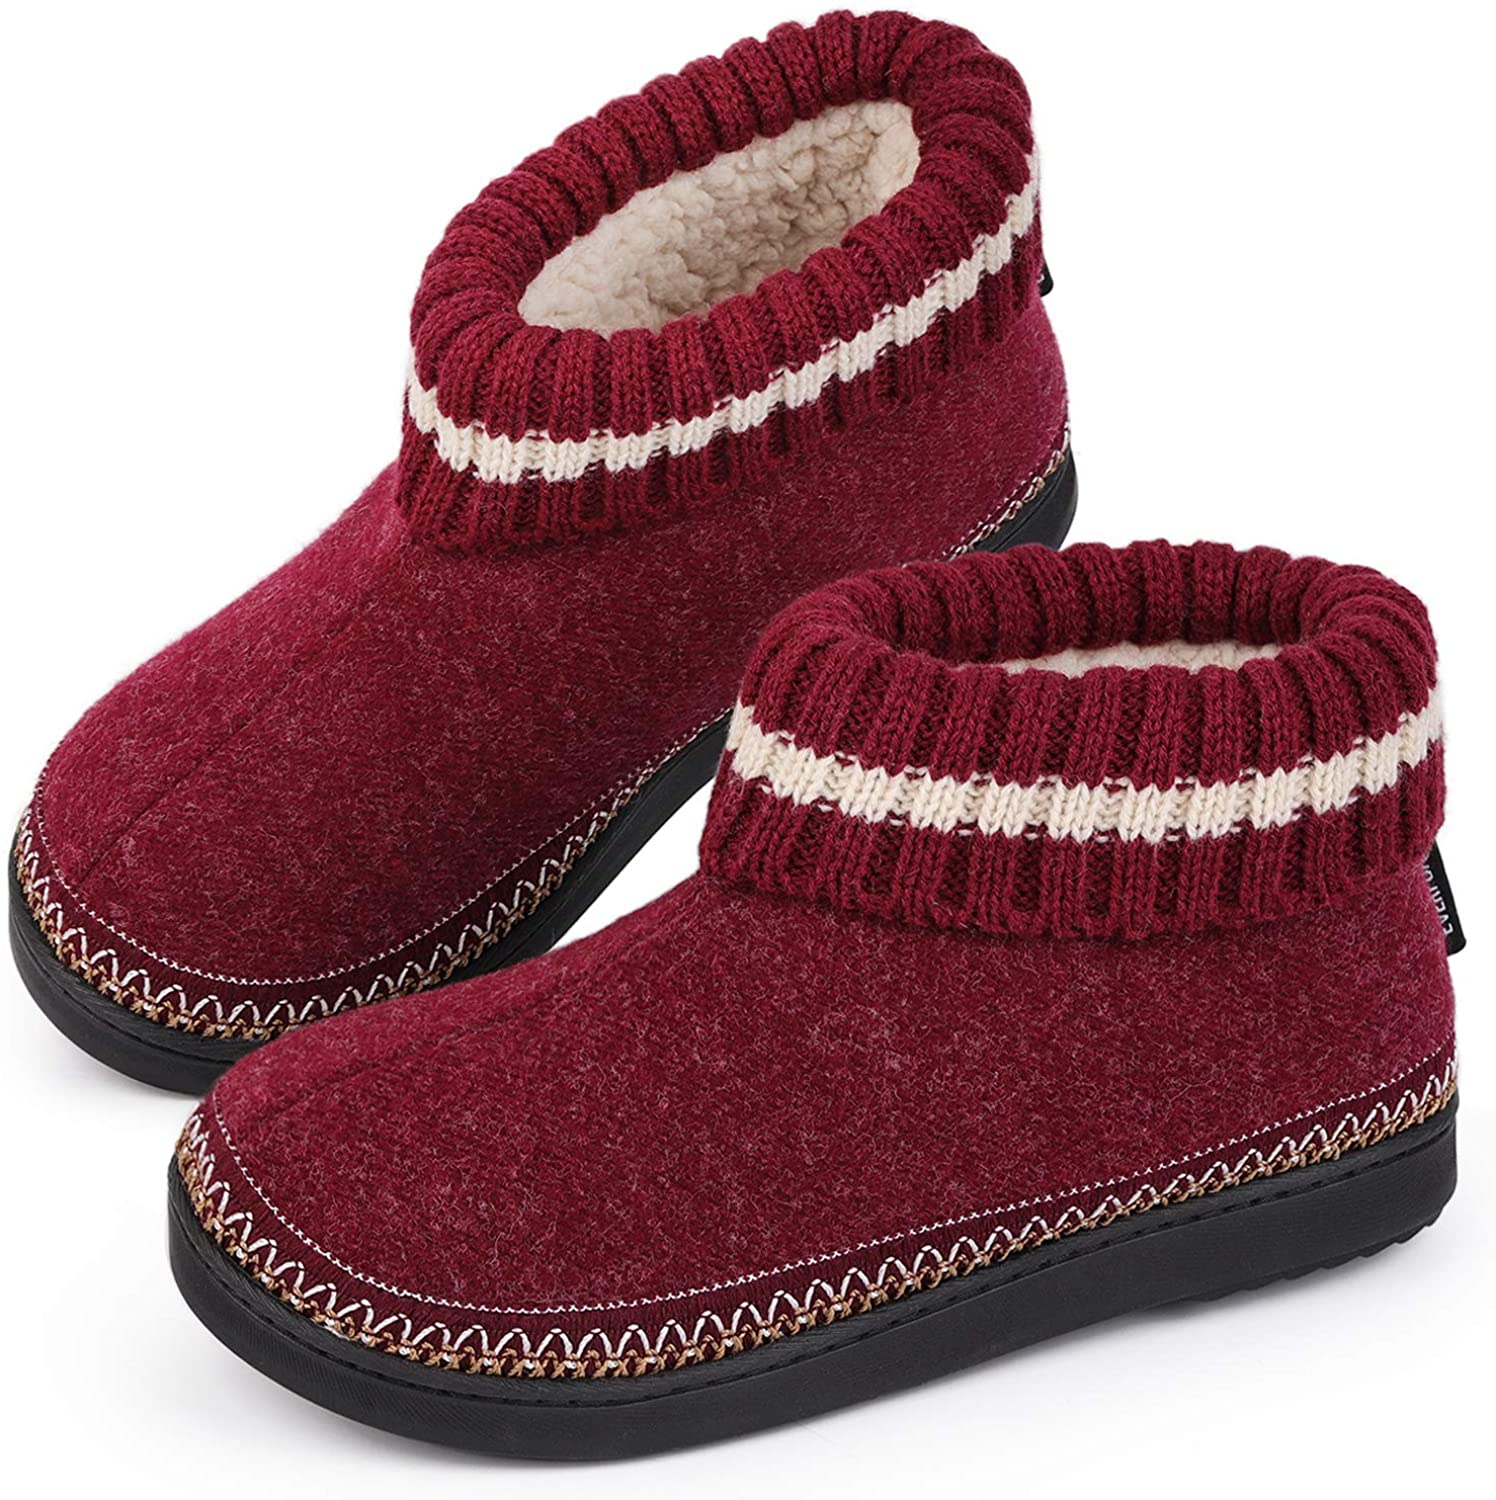 EverFoams Ladies Wool Memory Foam Hi-Top Boot Slippers with Knitted Collar-Wine Red